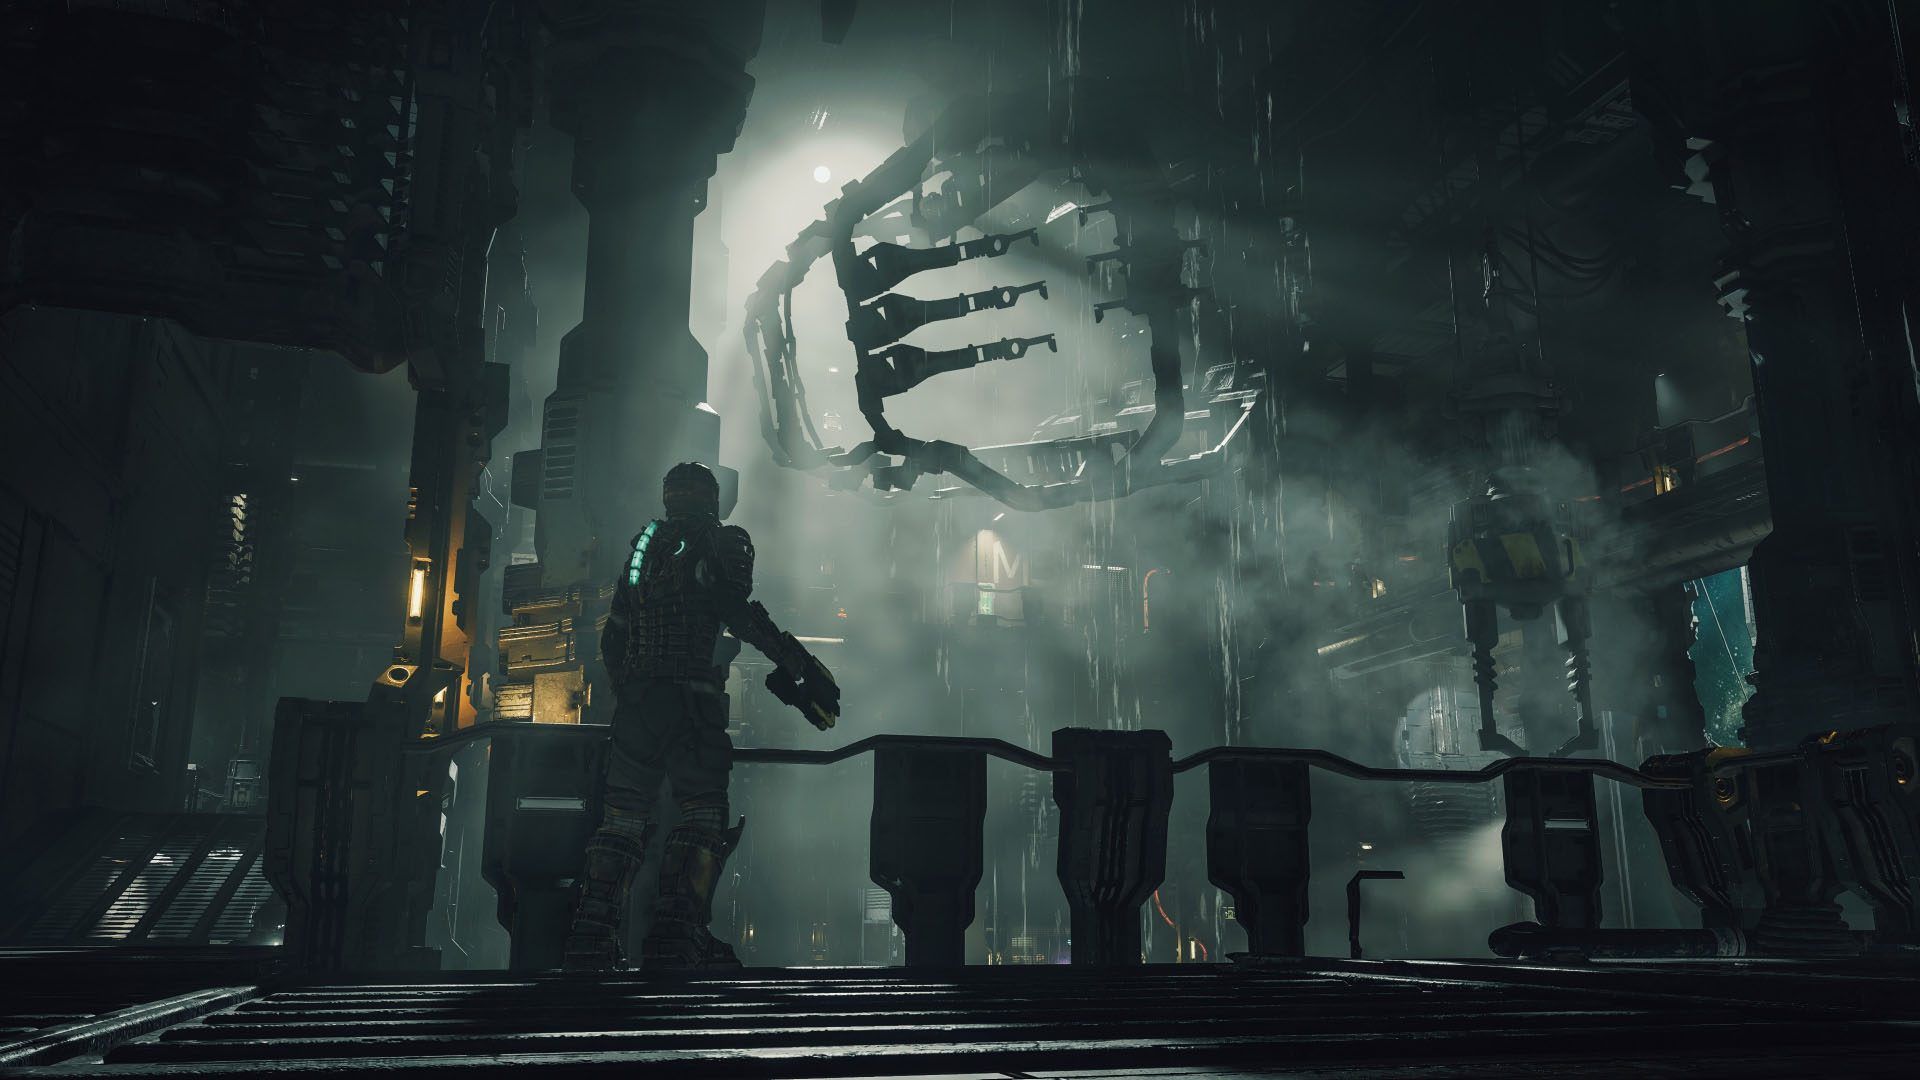 Dead Space' returns to haunt your dreams with new remake